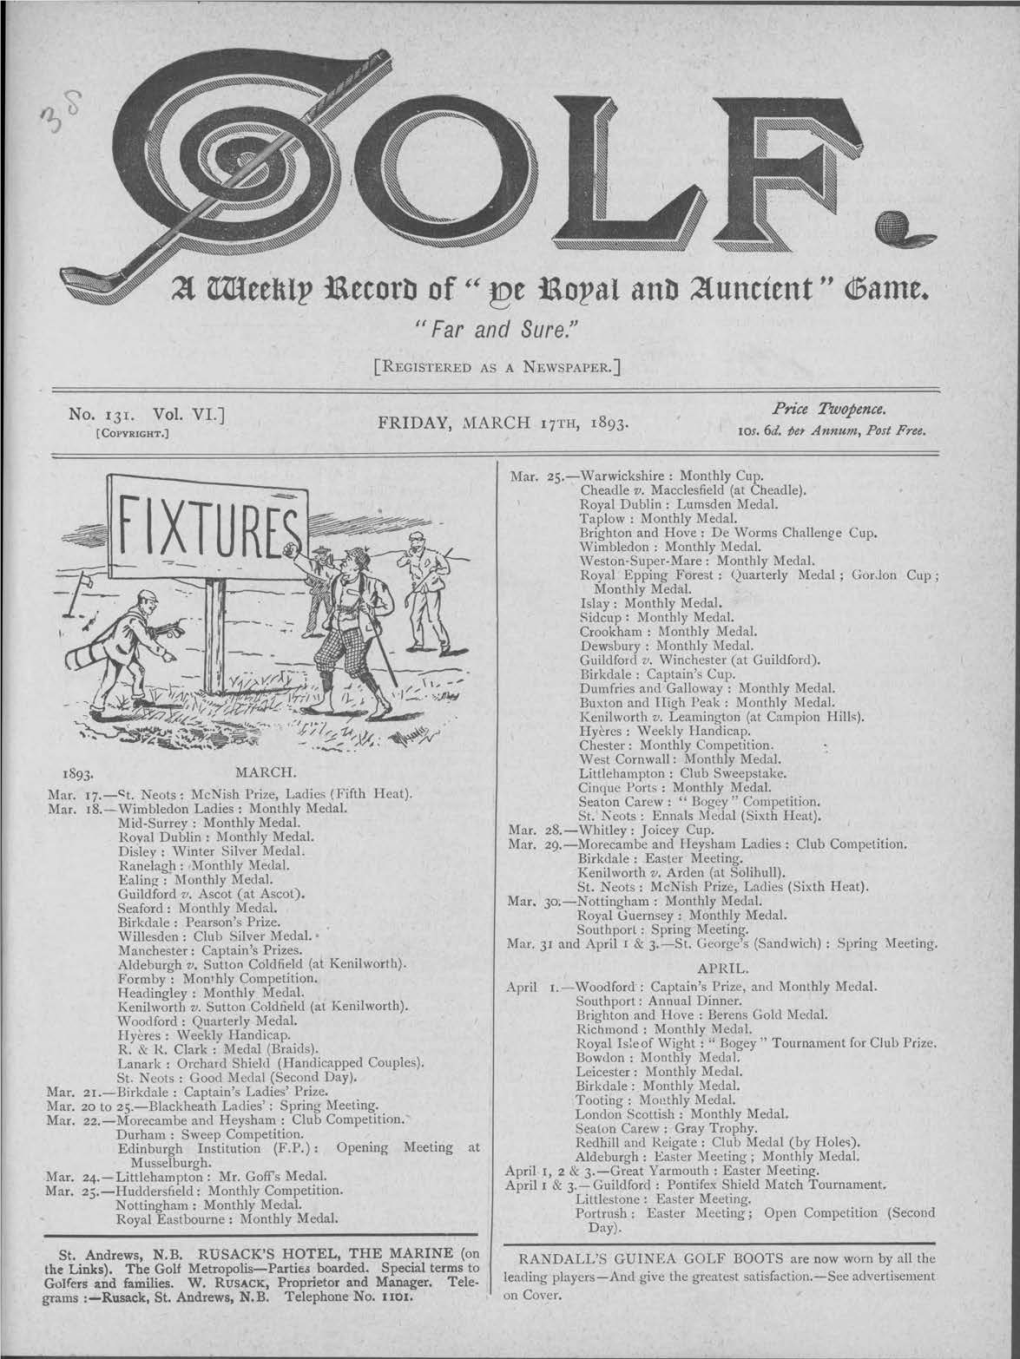 No. 131. Vol. VI.] FRIDAY, MARCH 17TH, 1893. Price Twopence